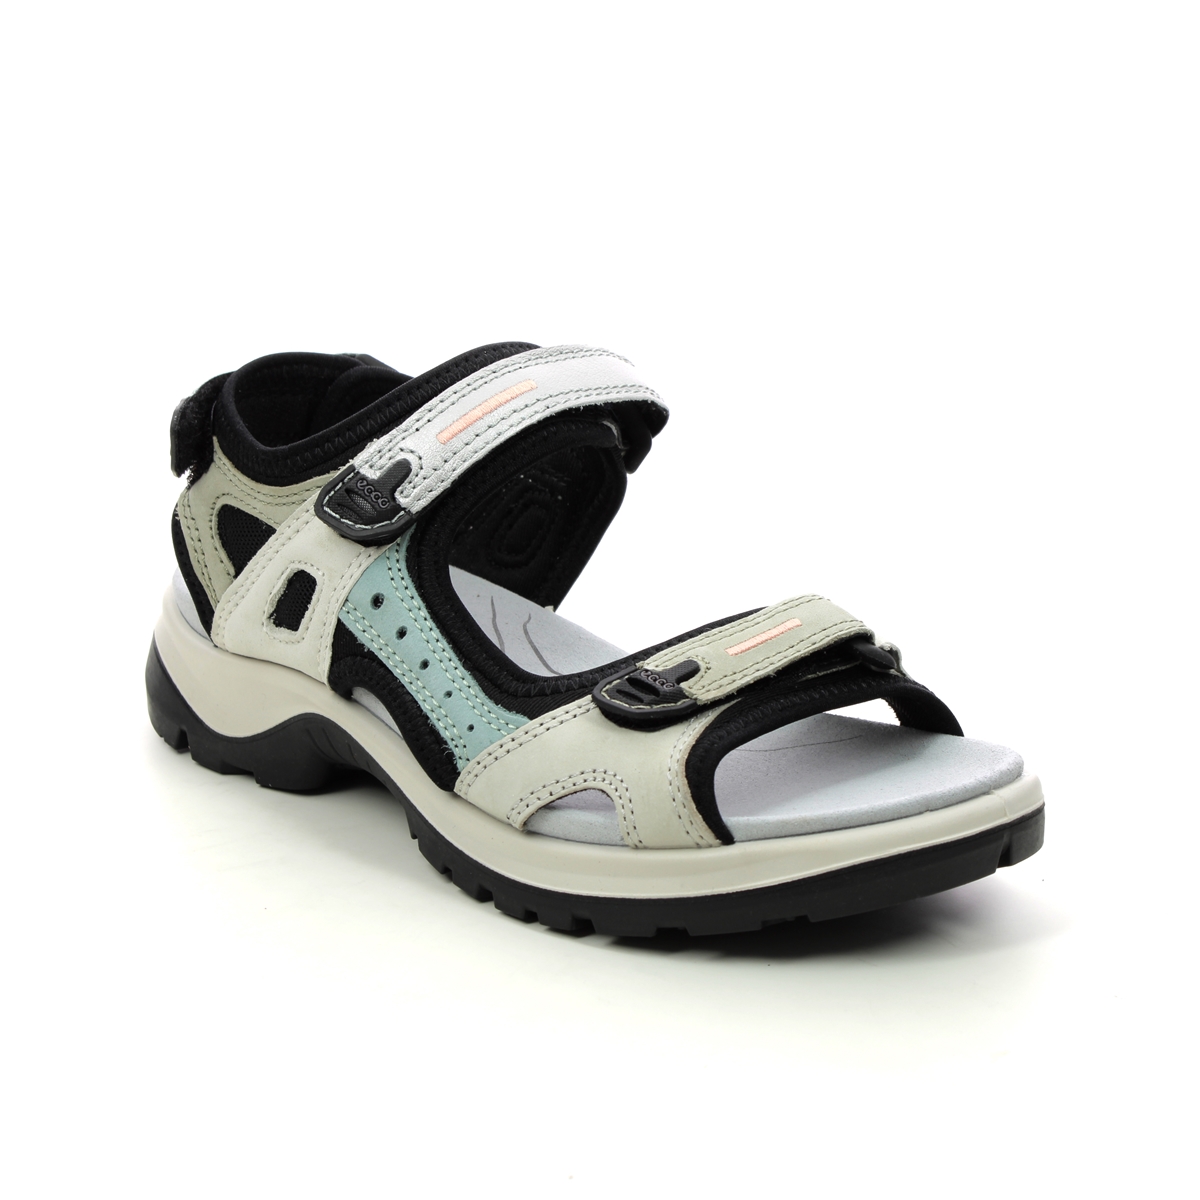 ECCO Offroad Lady 2 Sage Womens Walking Sandals 822083-52334 in a Plain Leather in Size 40